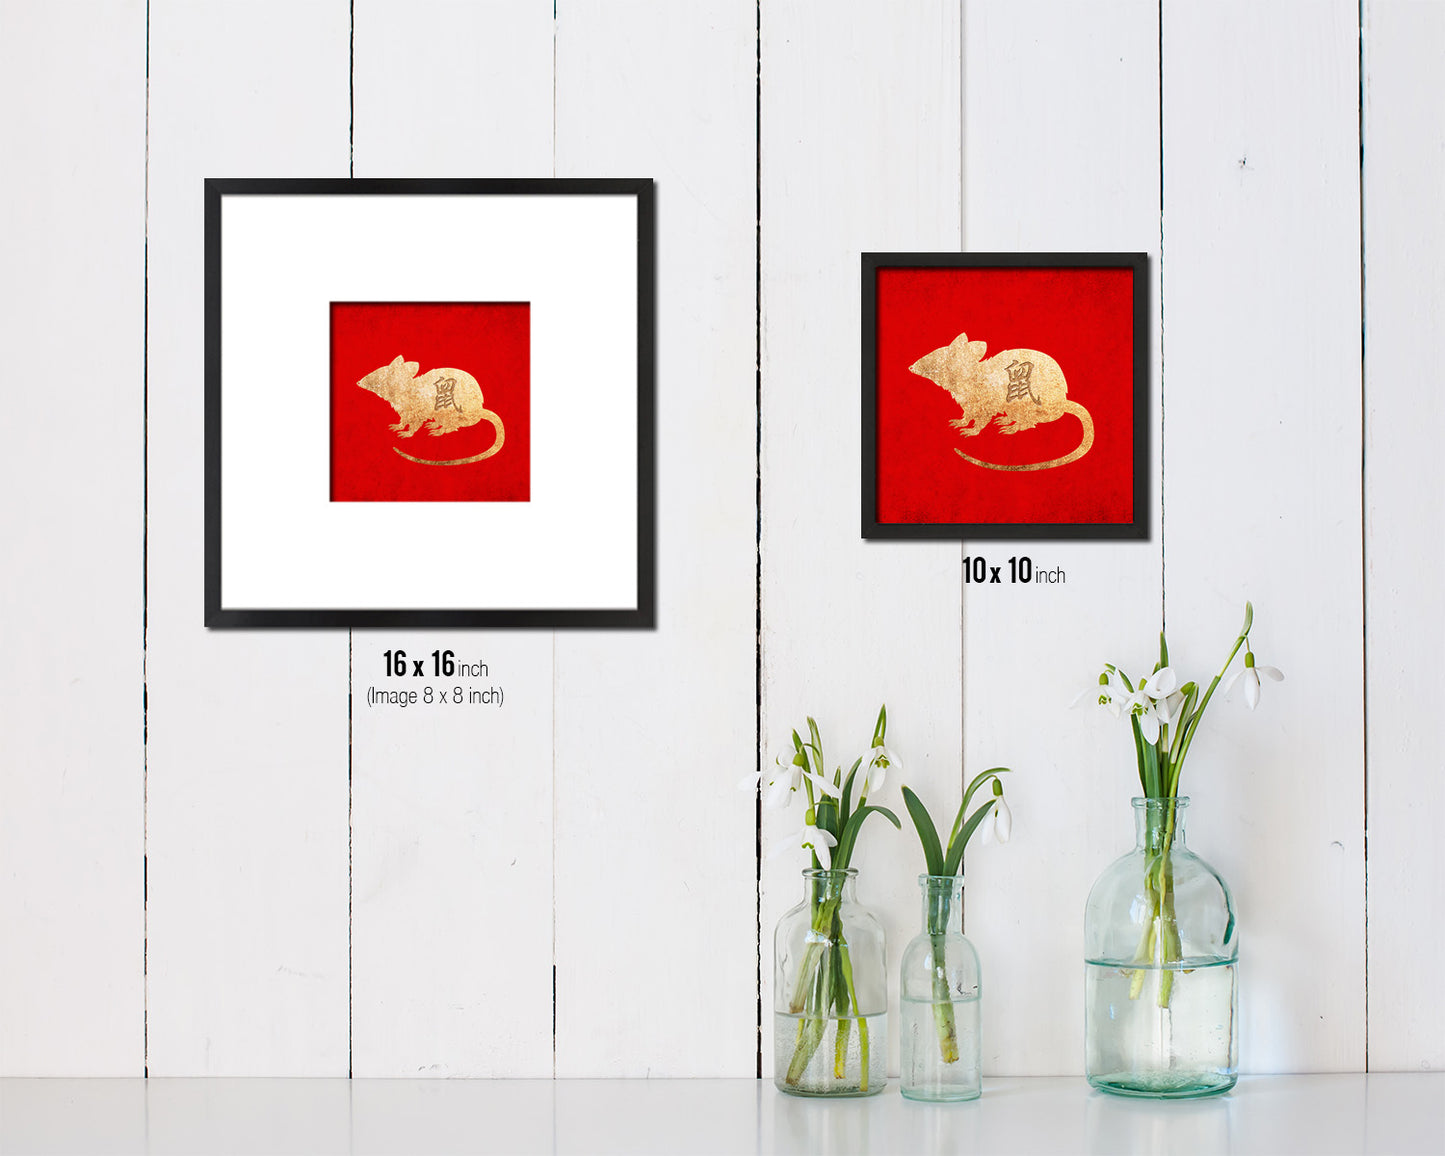 Rat Chinese Zodiac Character Wood Framed Print Wall Art Decor Gifts, Red